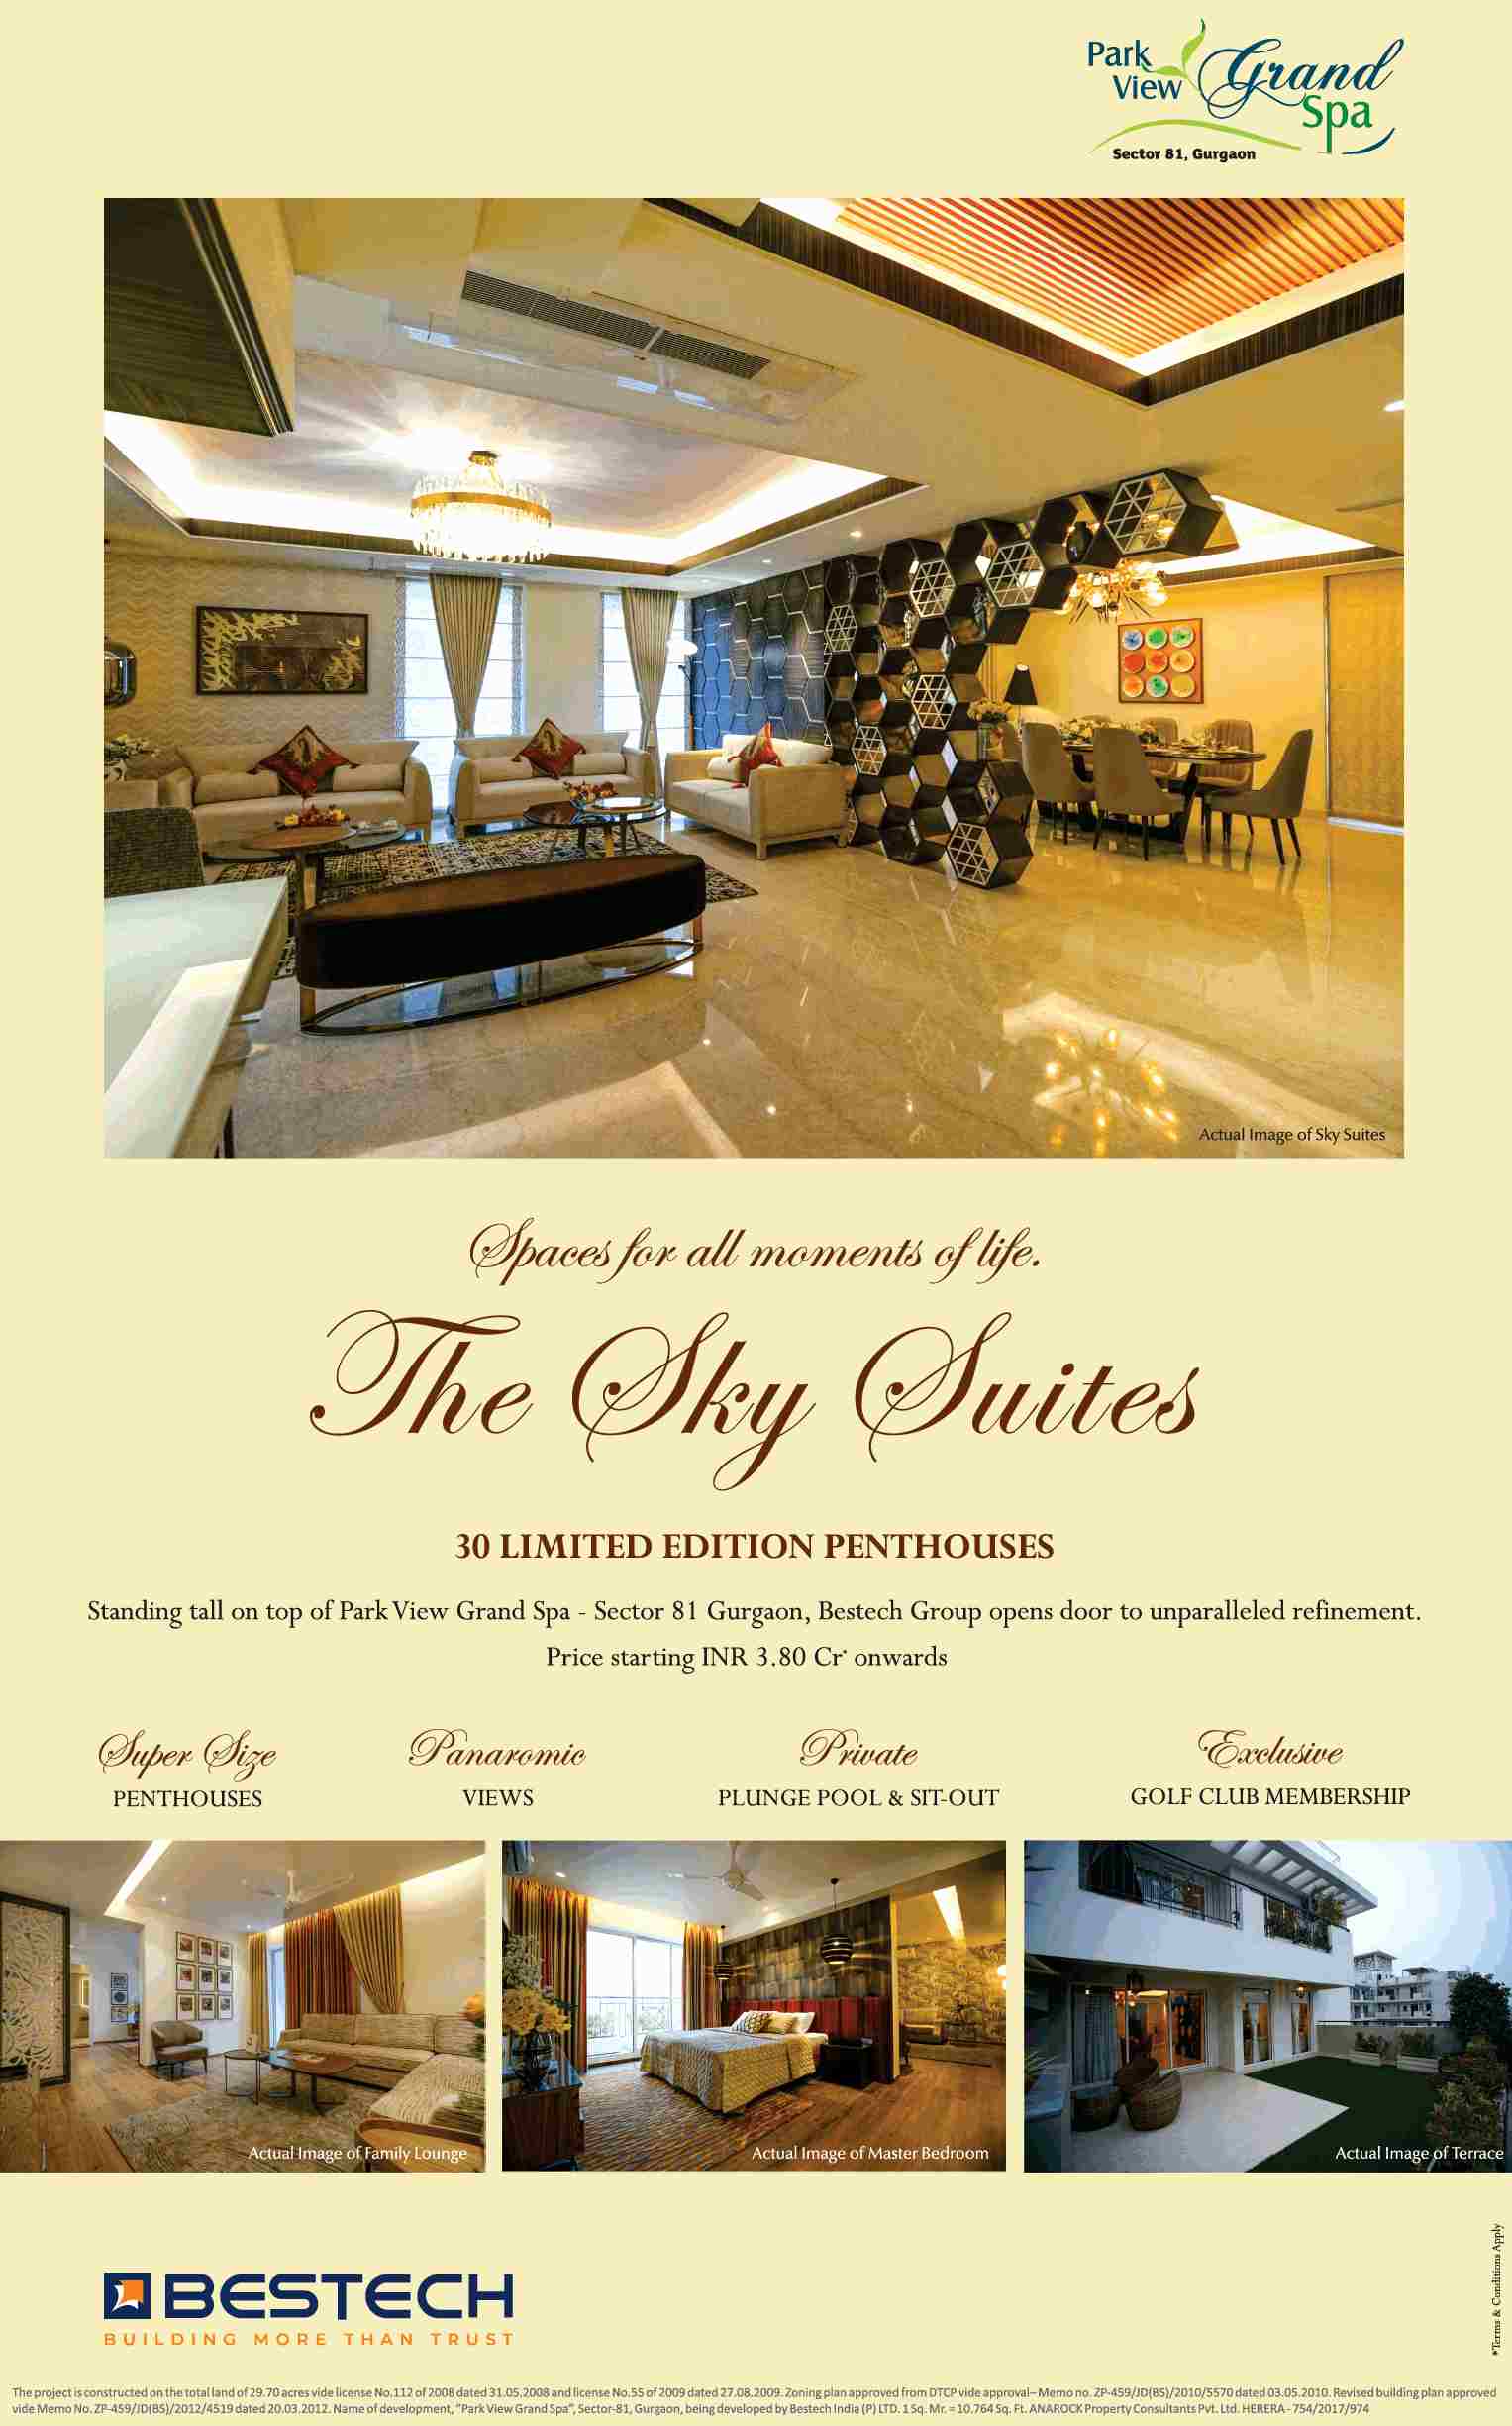 Presenting The Sky Suites at Bestech Park View Grand Spa in Sector 81, Gurgaon